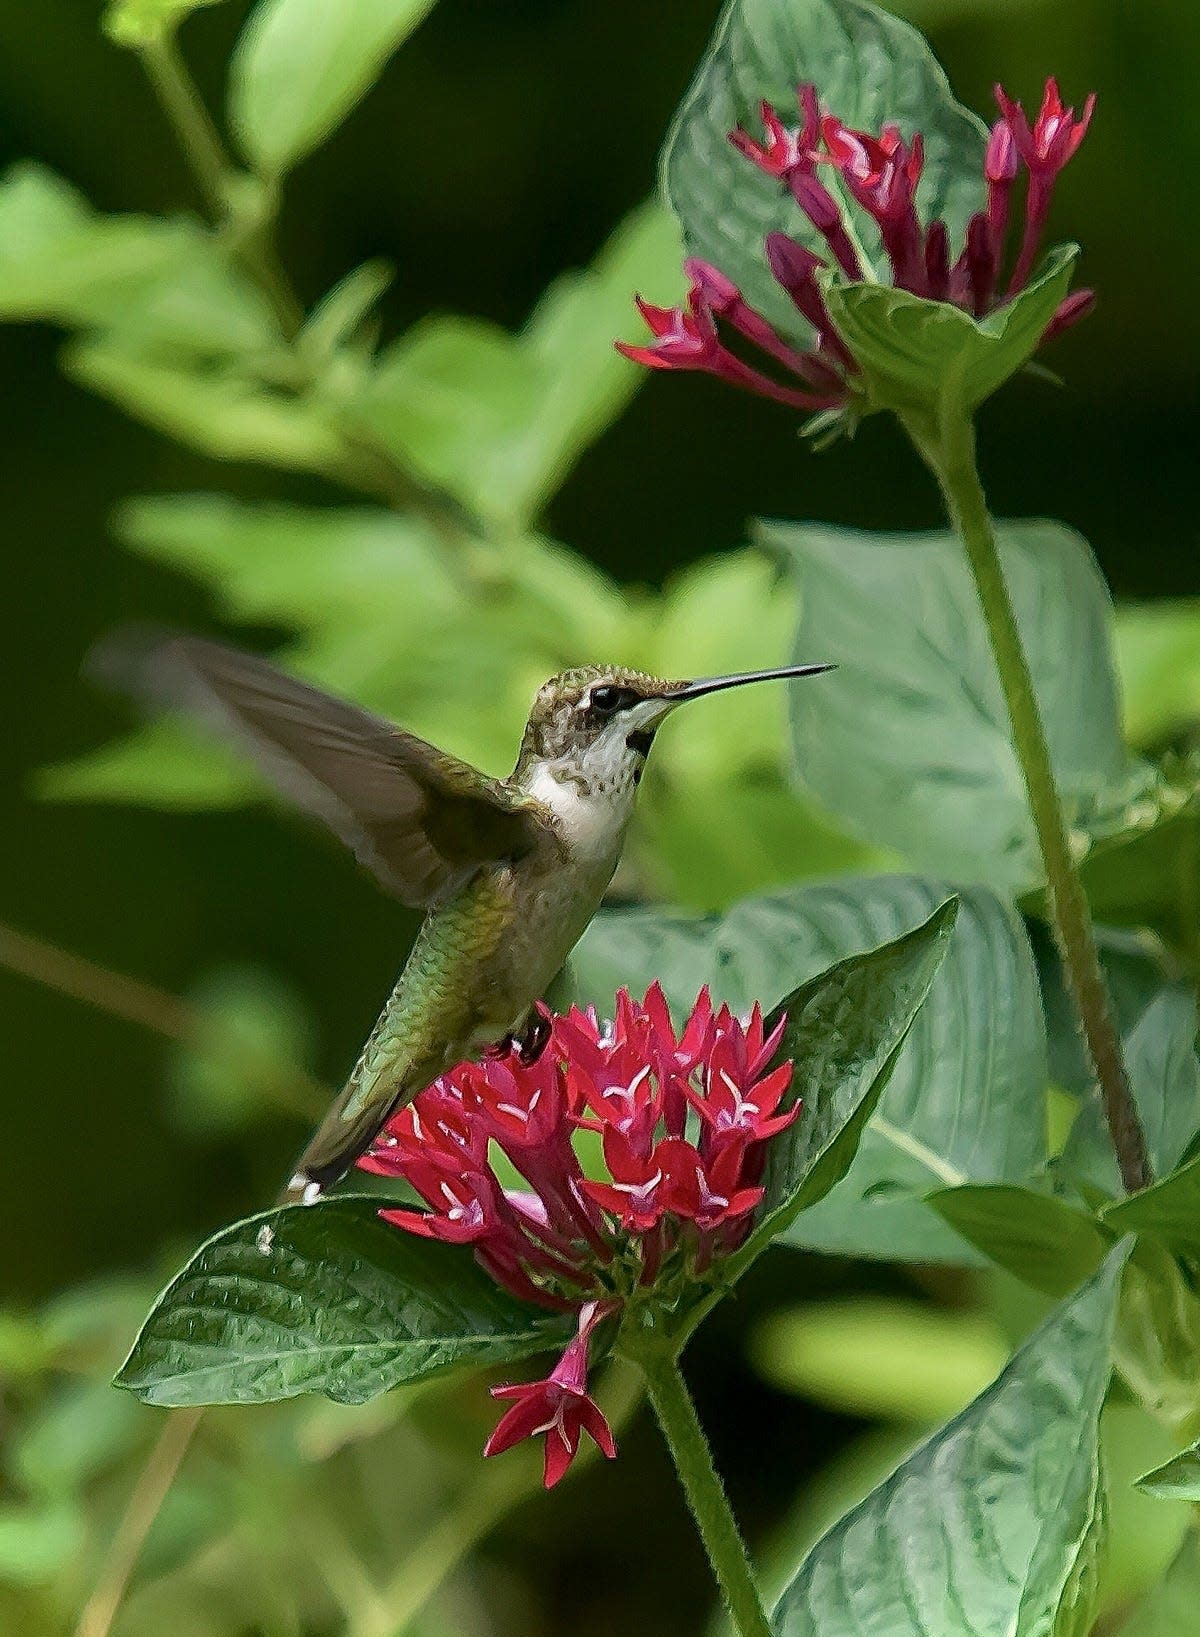 This Ruby-throated hummingbird appears to be deciding which blossom to visit next.